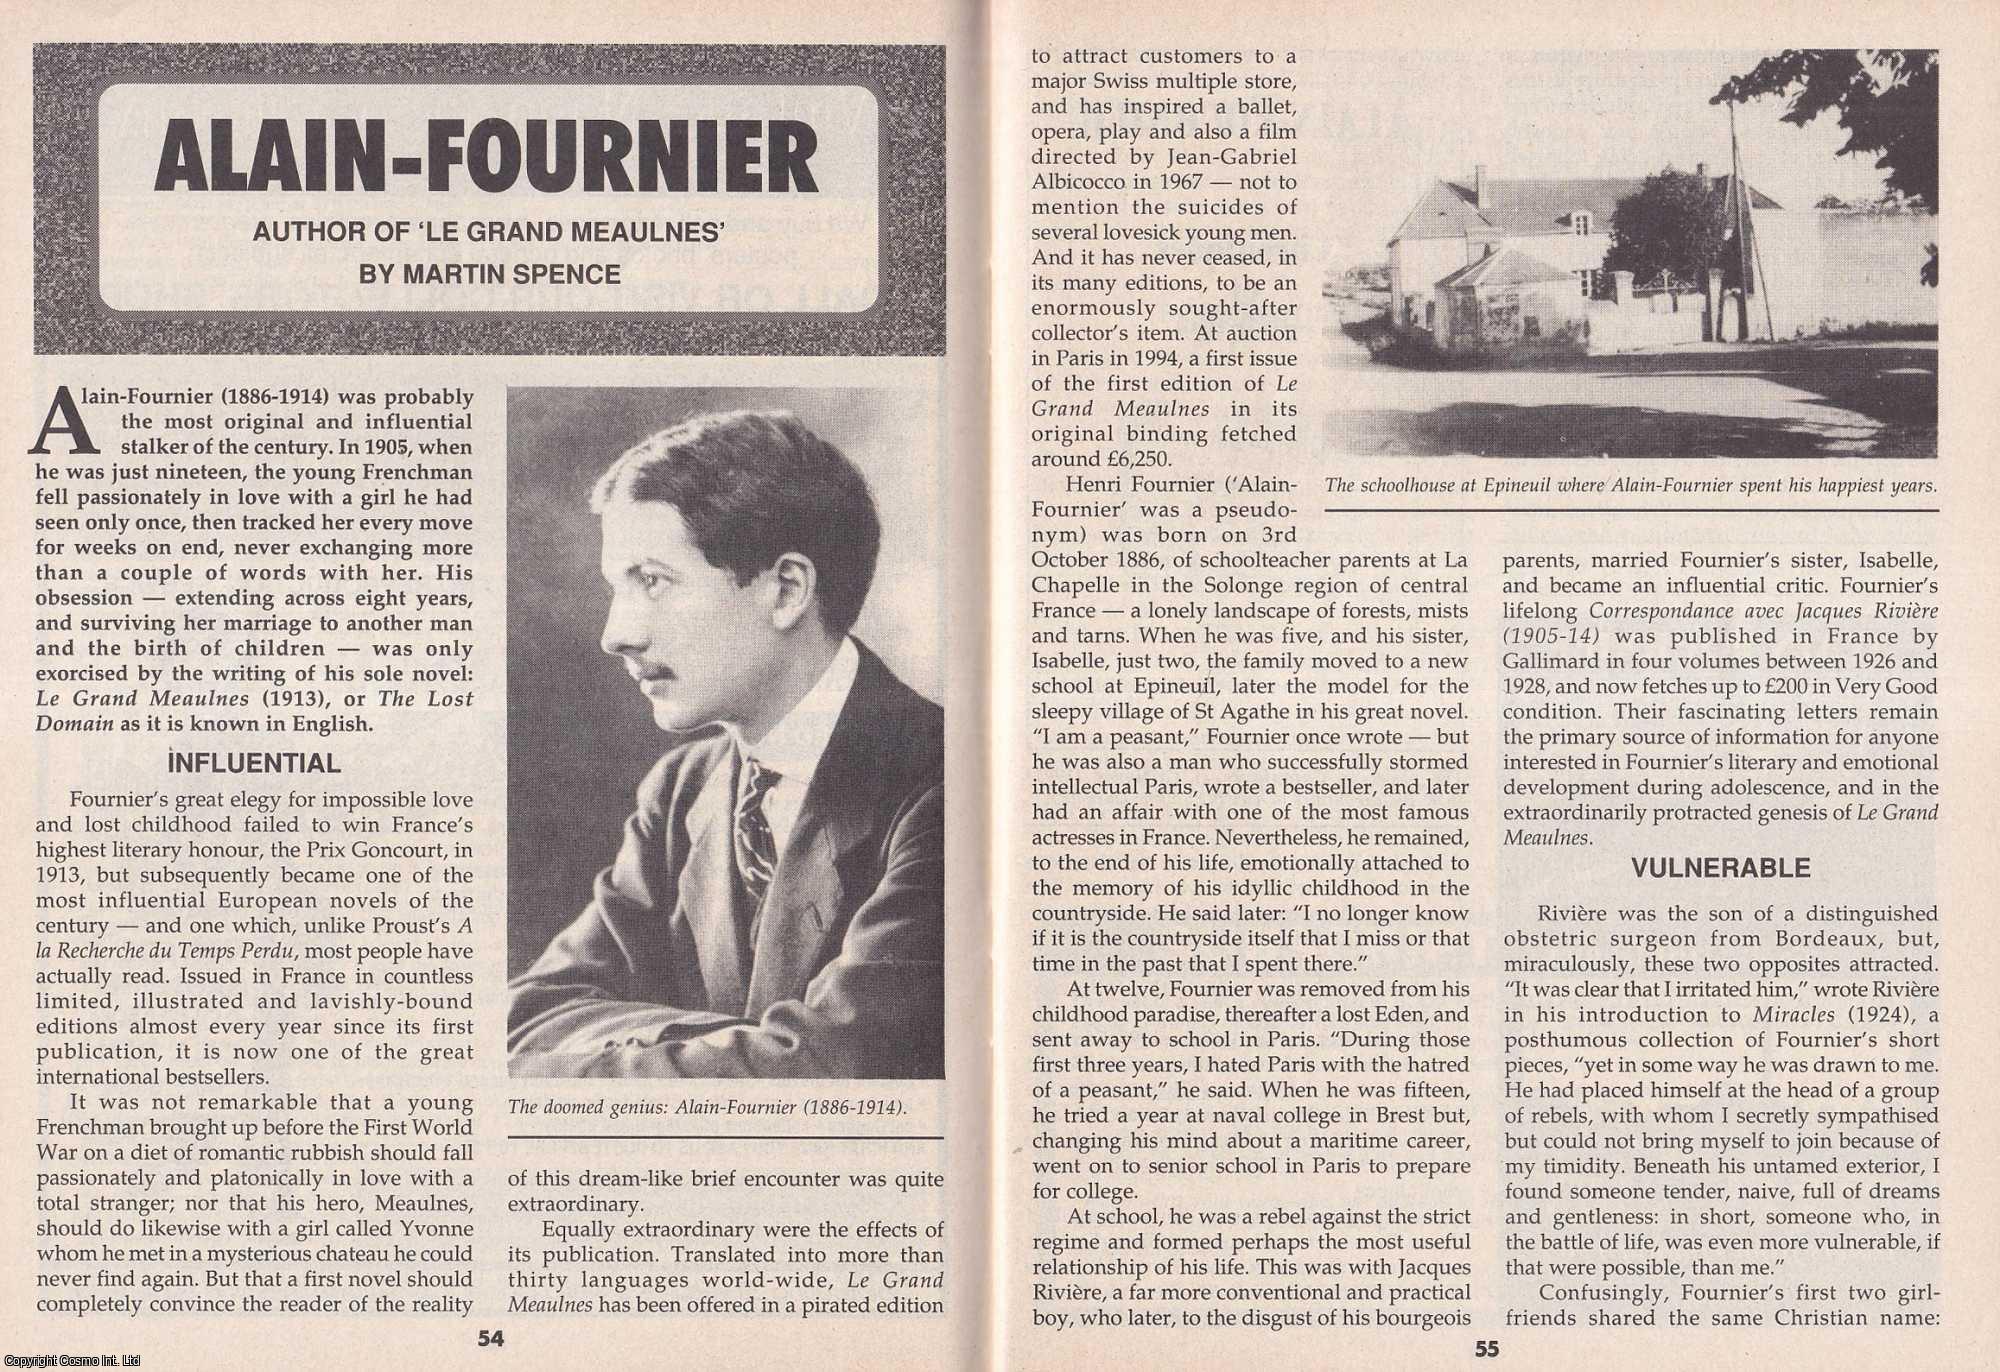 Martin Spence - Alain-Fournier. Author of Le Grand Meaulnes. This is an original article separated from an issue of The Book & Magazine Collector publication.